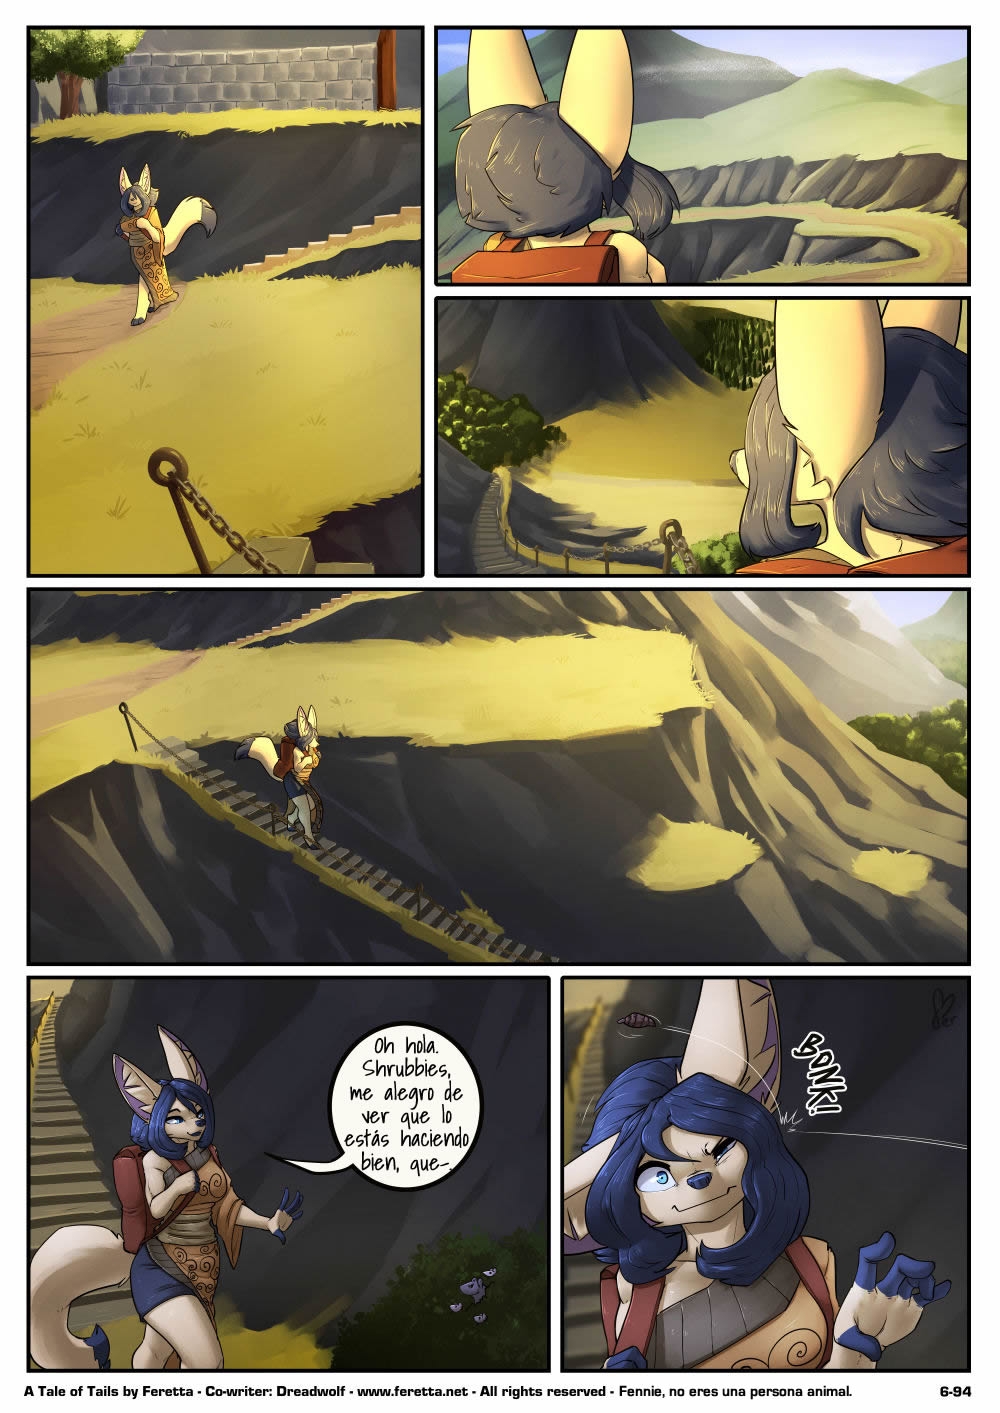 [Feretta] A Tale of Tails: Chapter 6 - Paths converge / Los caminos convergen [Spanish] [Red Fox Makkan] 94